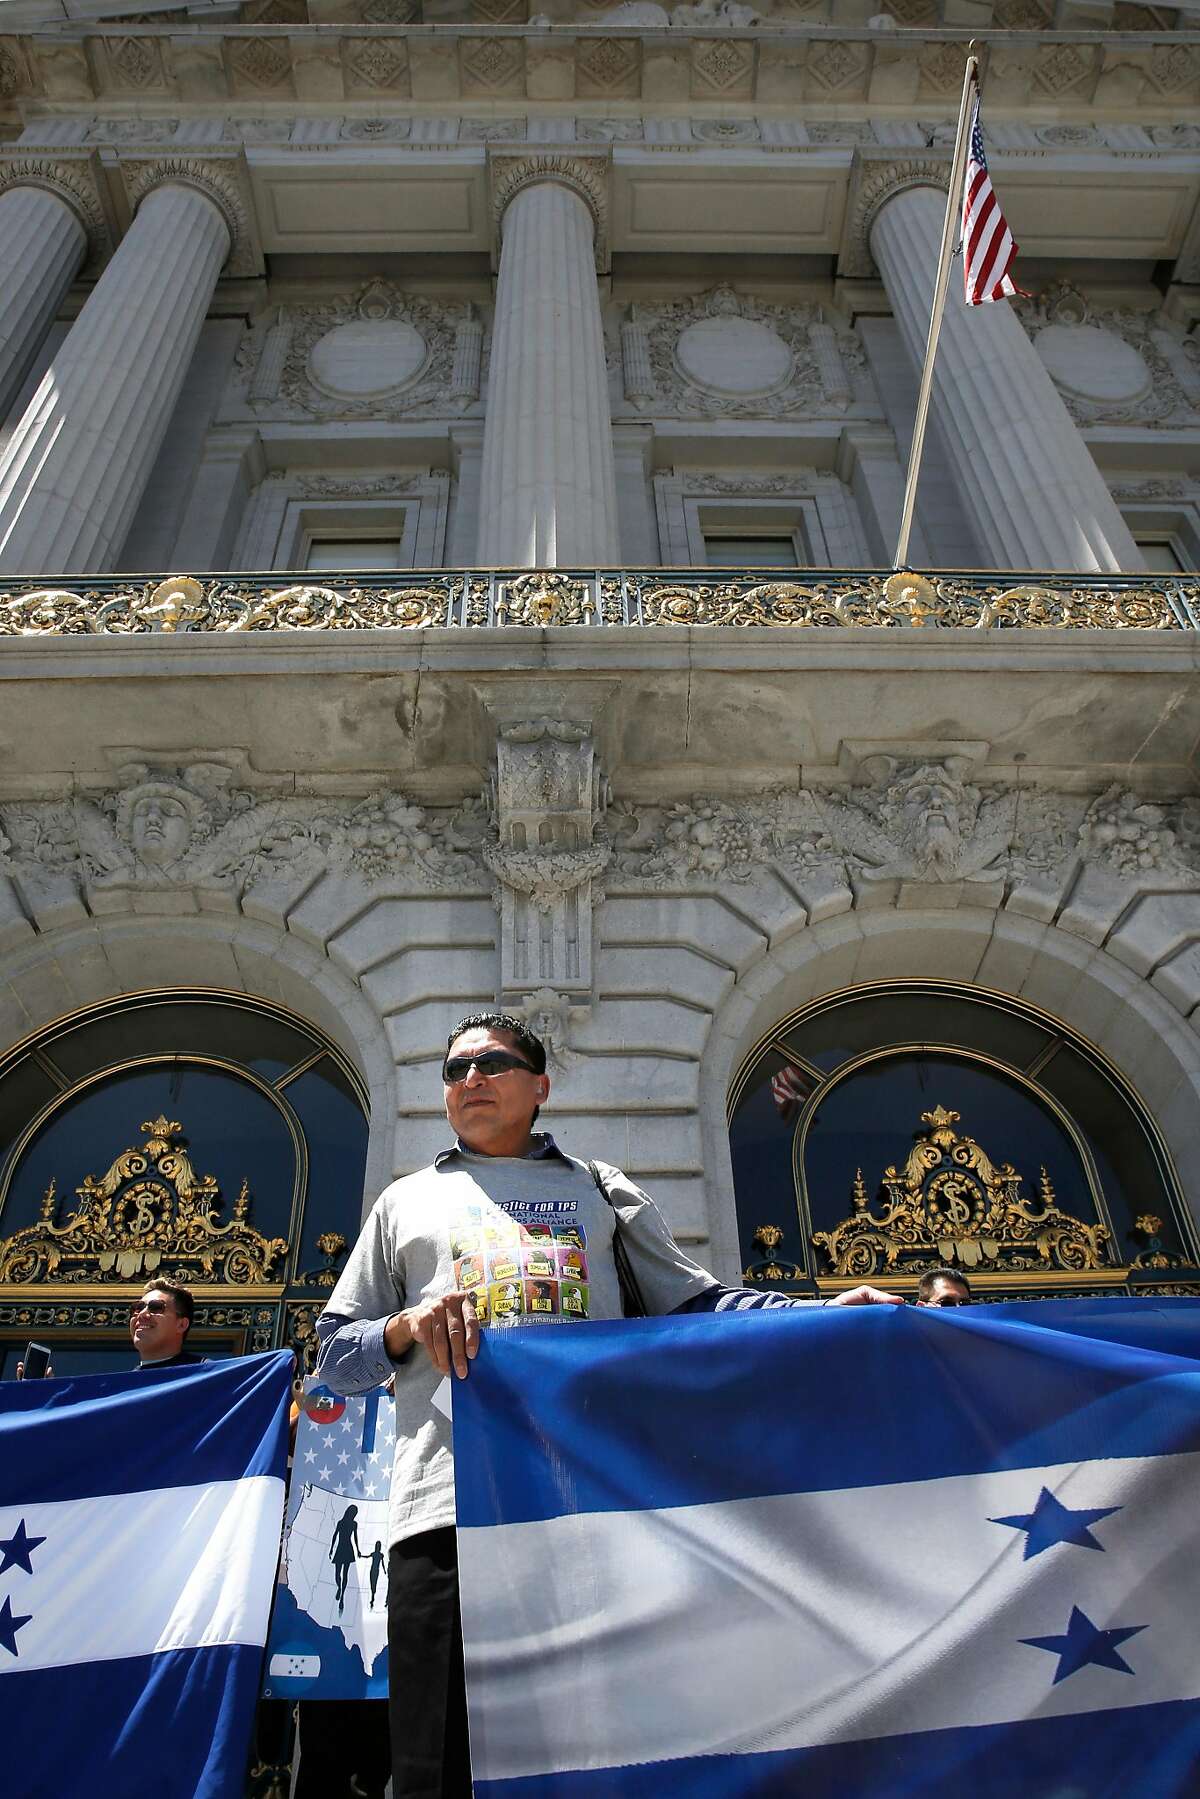 Jose Ramos, a temporary protected status holder has been in US for 19 years, is seen during a news conference and rally in San Francisco, Ca. on Mon. May 7, 2018, on the steps of City Hall to criticize the Trump Administration decision, announced Friday, to end a program that has since it started in 1999 protected tens of thousands of Hondurans in the U.S. from deportation.